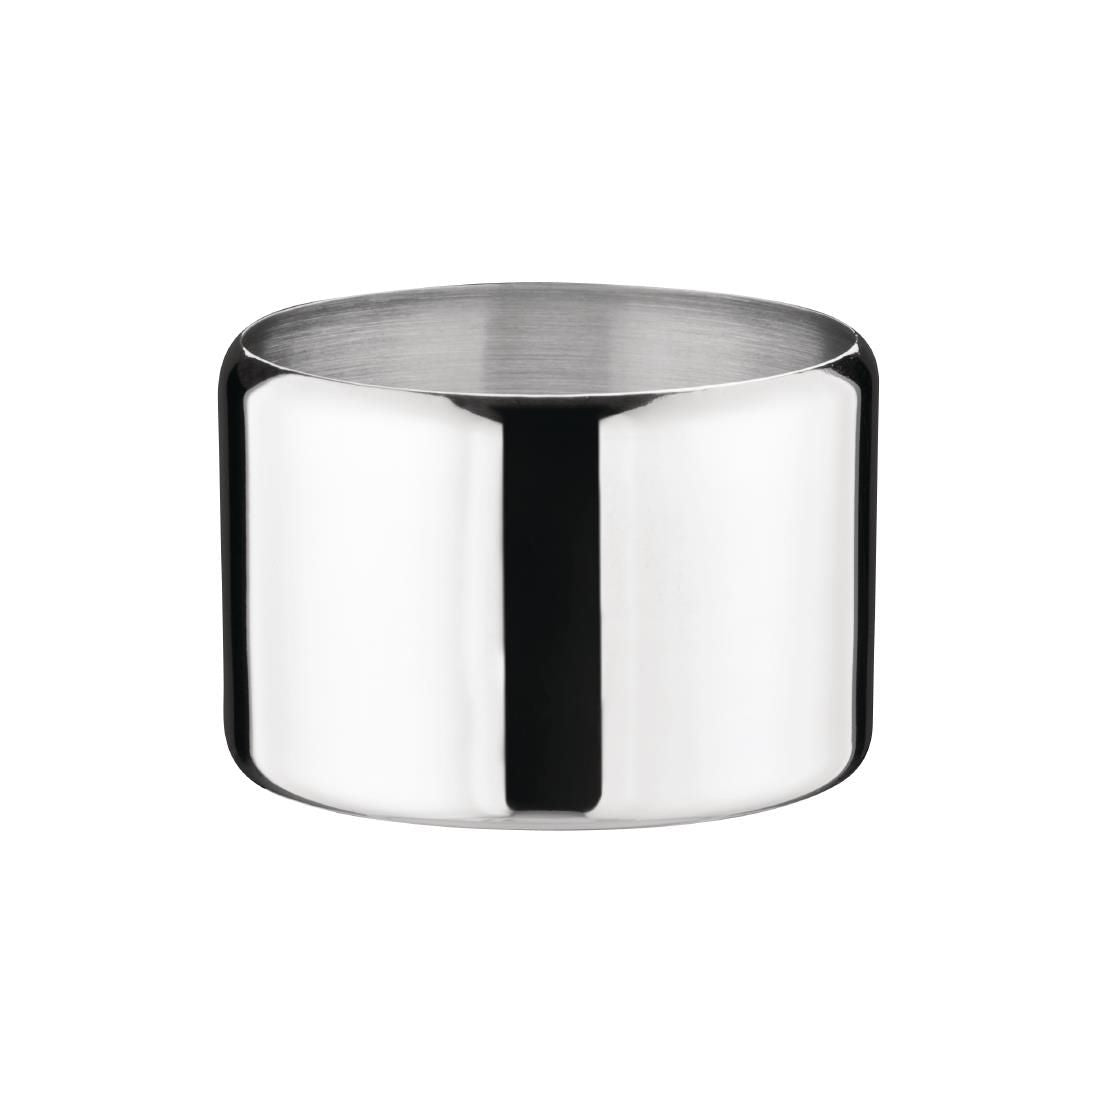 Olympia Concorde Stainless Steel Sugar Bowl